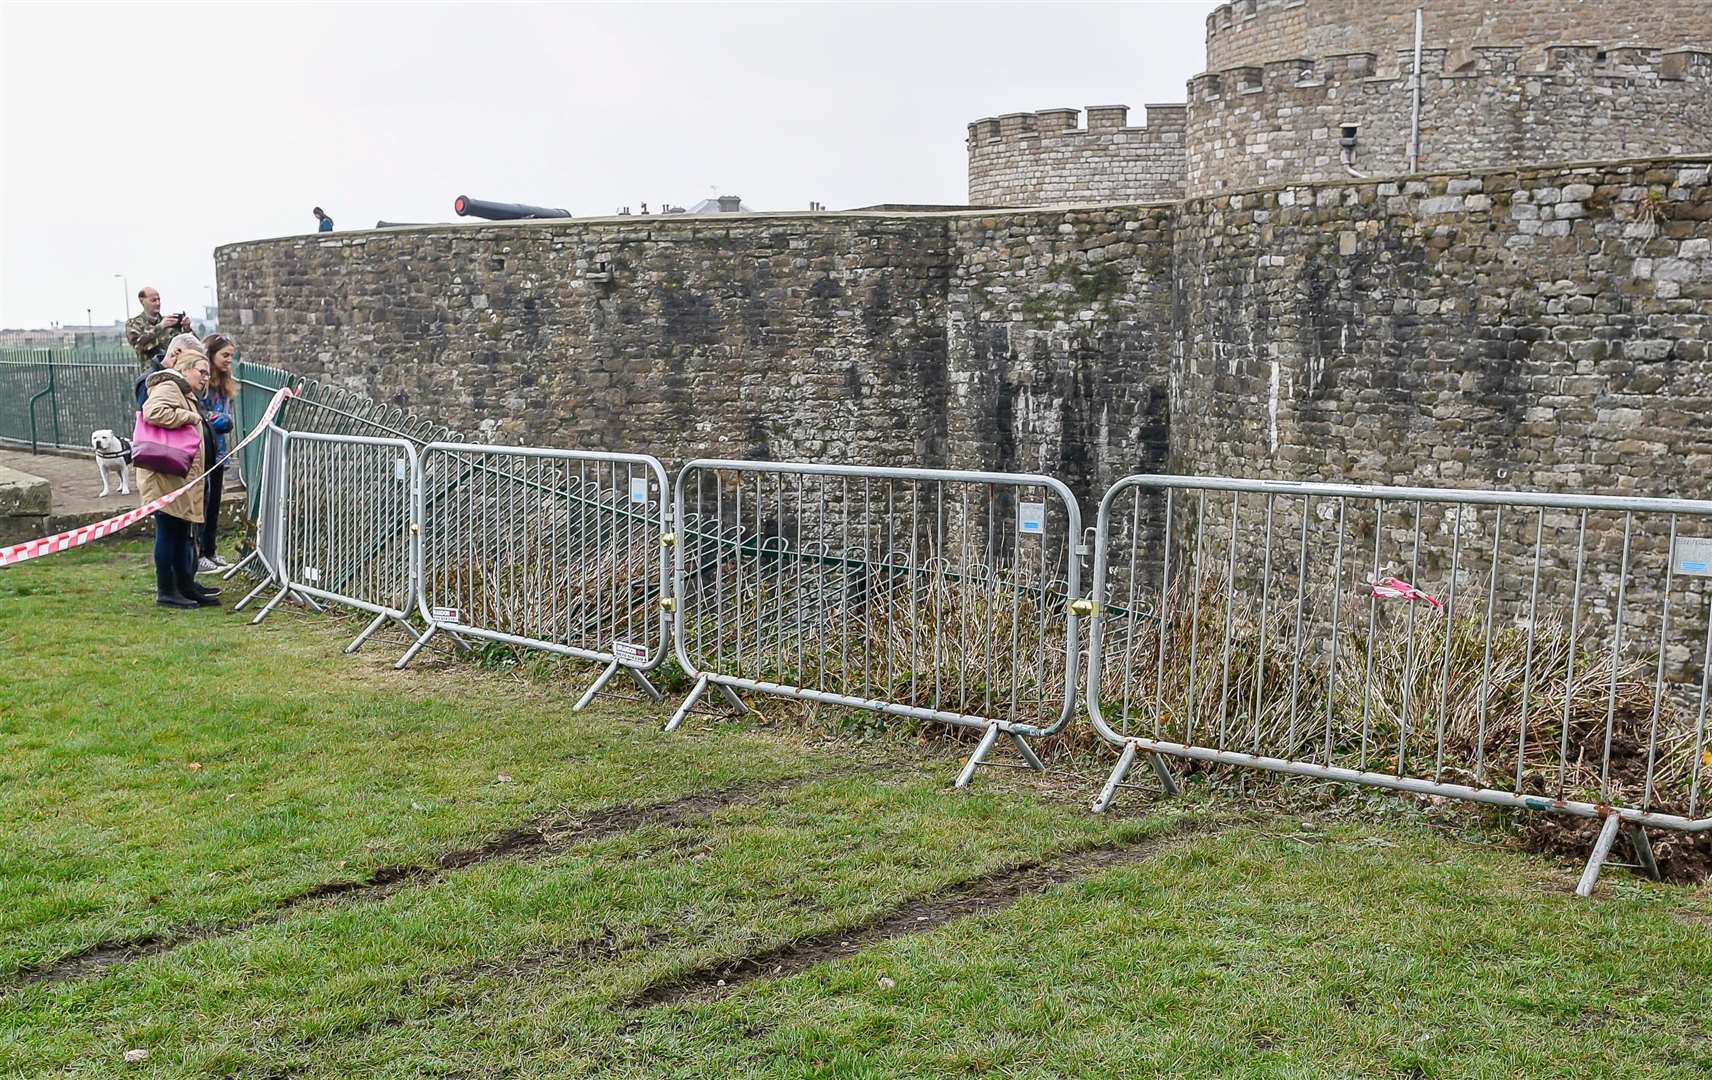 Skid marks on the grass in front of the railings where a temporary fence has been erected. Picture: Alan Langley